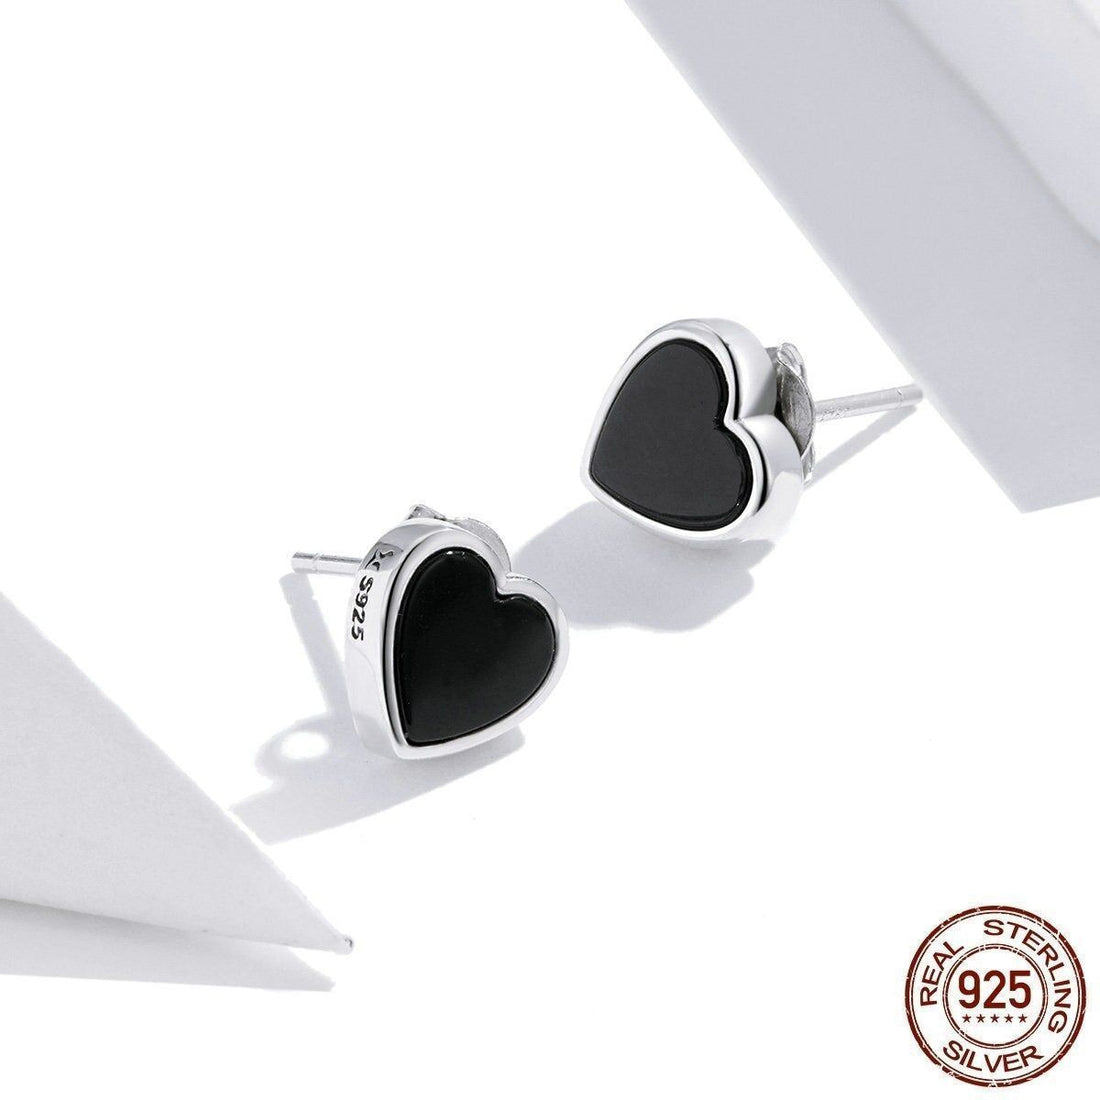 Korean 925 Sterling Silver Black Mini Earrings Charm Jewelry WOS08 - Touchy Style .